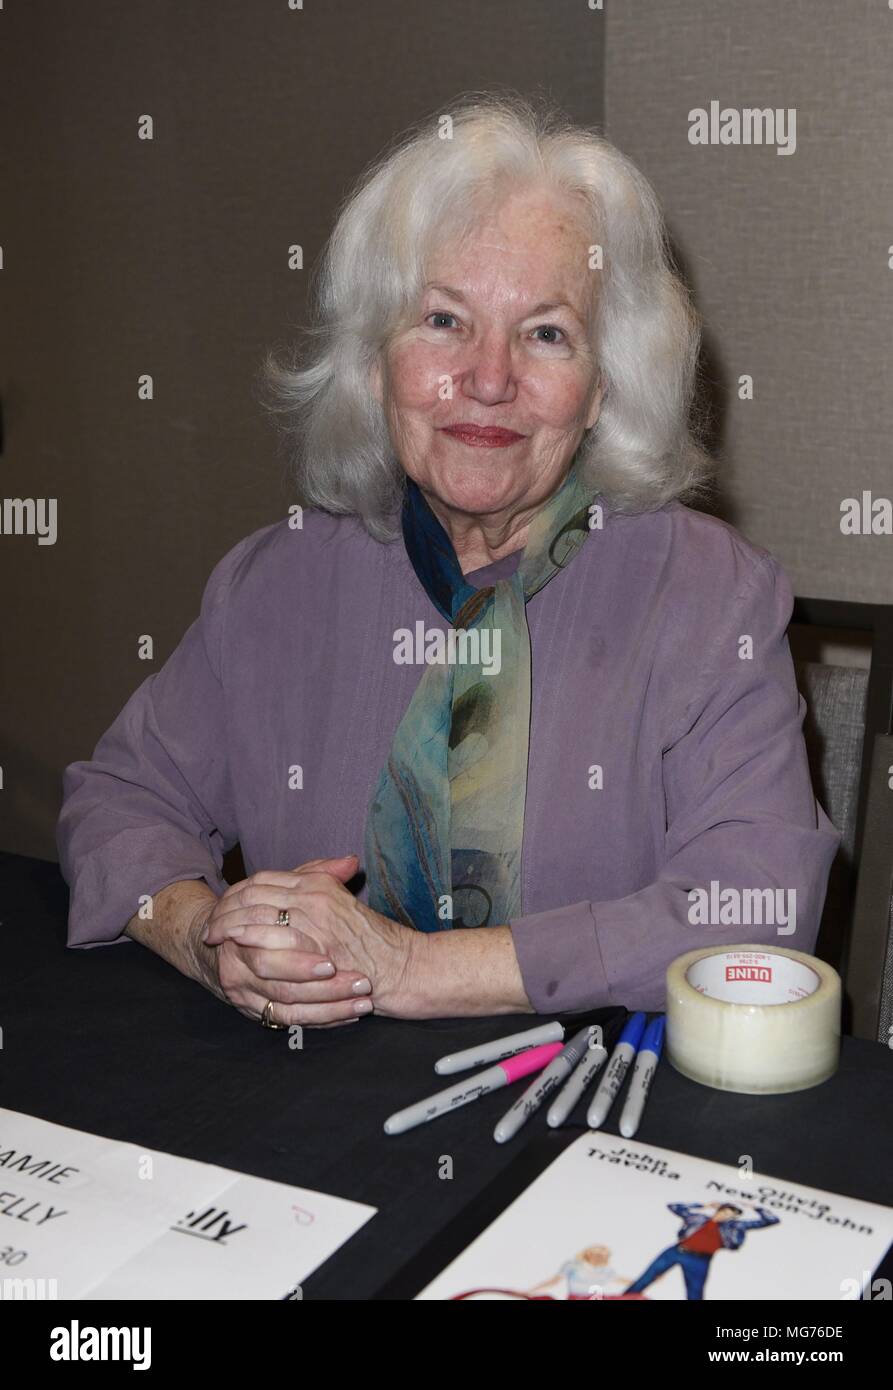 Parsippany, NJ, USA. 27th Apr, 2018. Jamie Donnelly in attendance for Chiller Theatre Toy, Model and Film Expo, Hilton Parsippany, Parsippany, NJ April 27, 2018. Credit: Derek Storm/Everett Collection/Alamy Live News Stock Photo